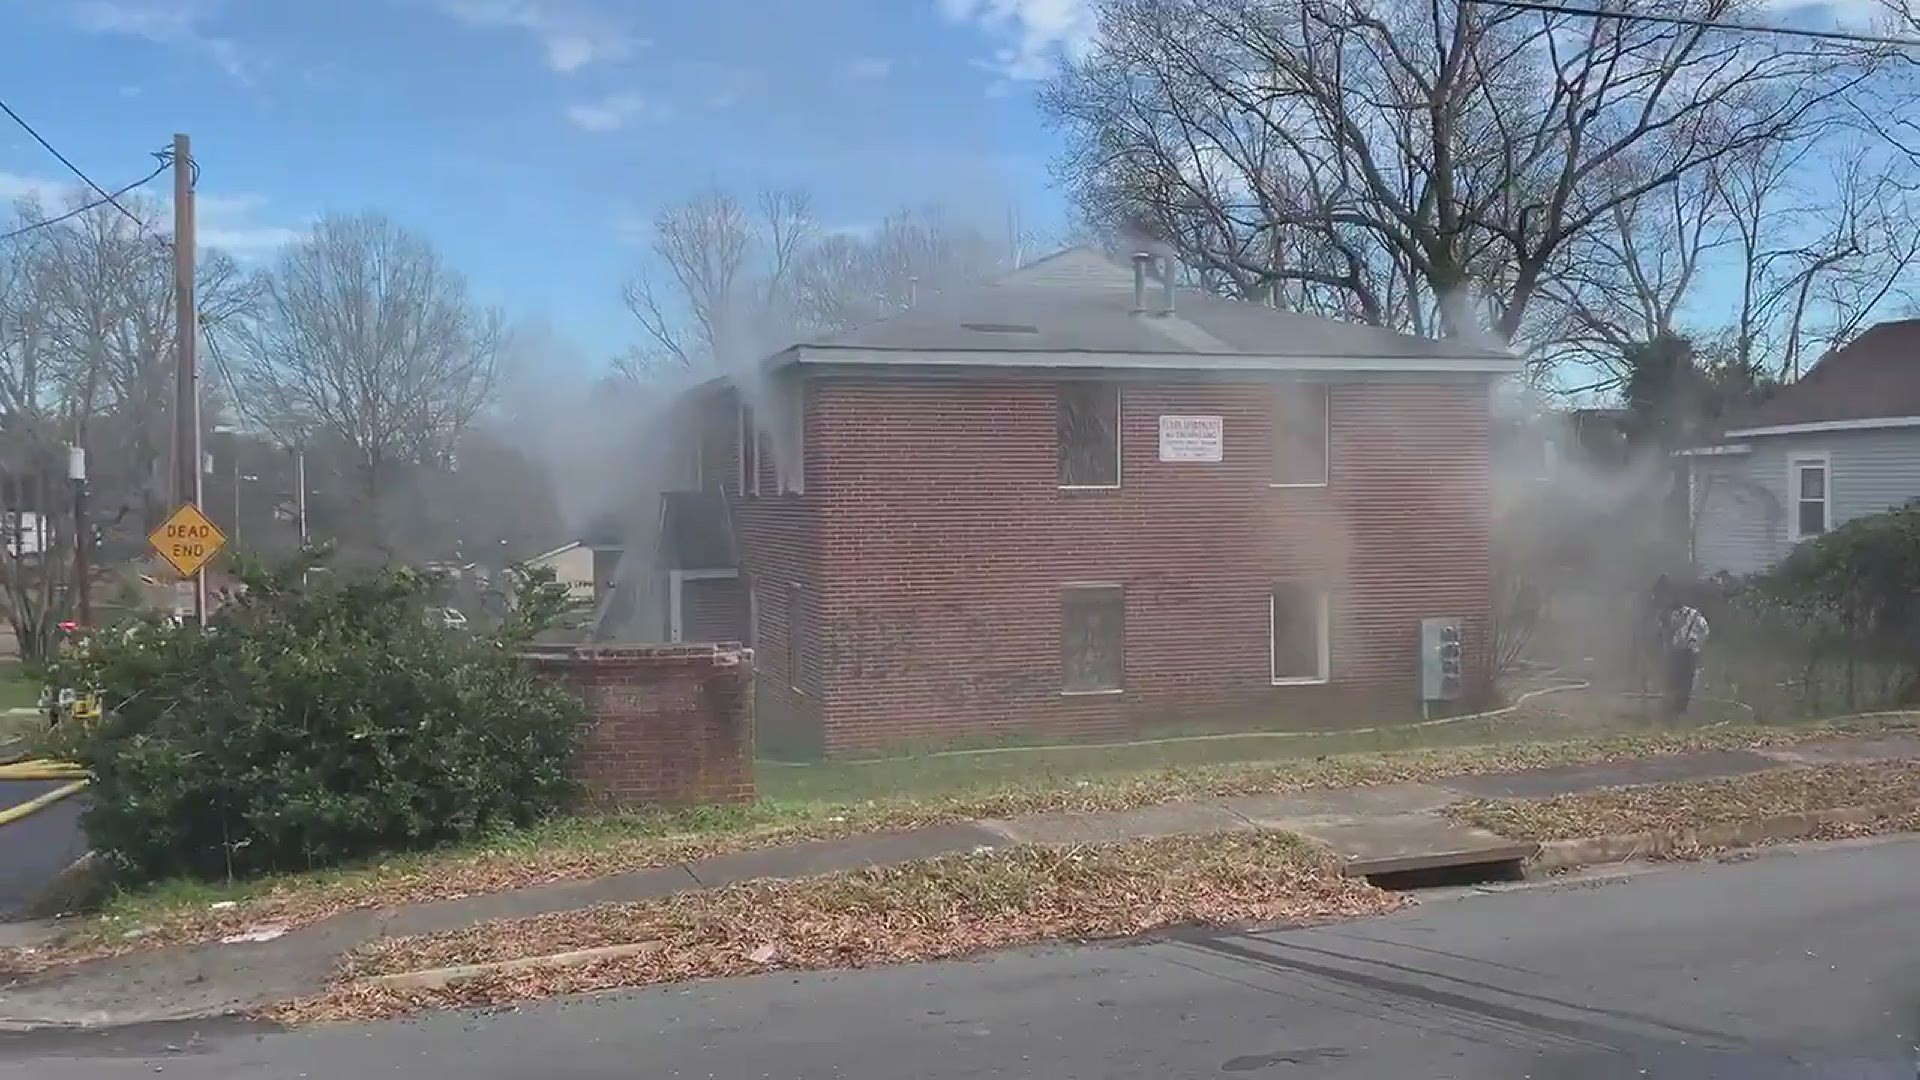 The apartment fire is at Jackson Ave. and 24th street.